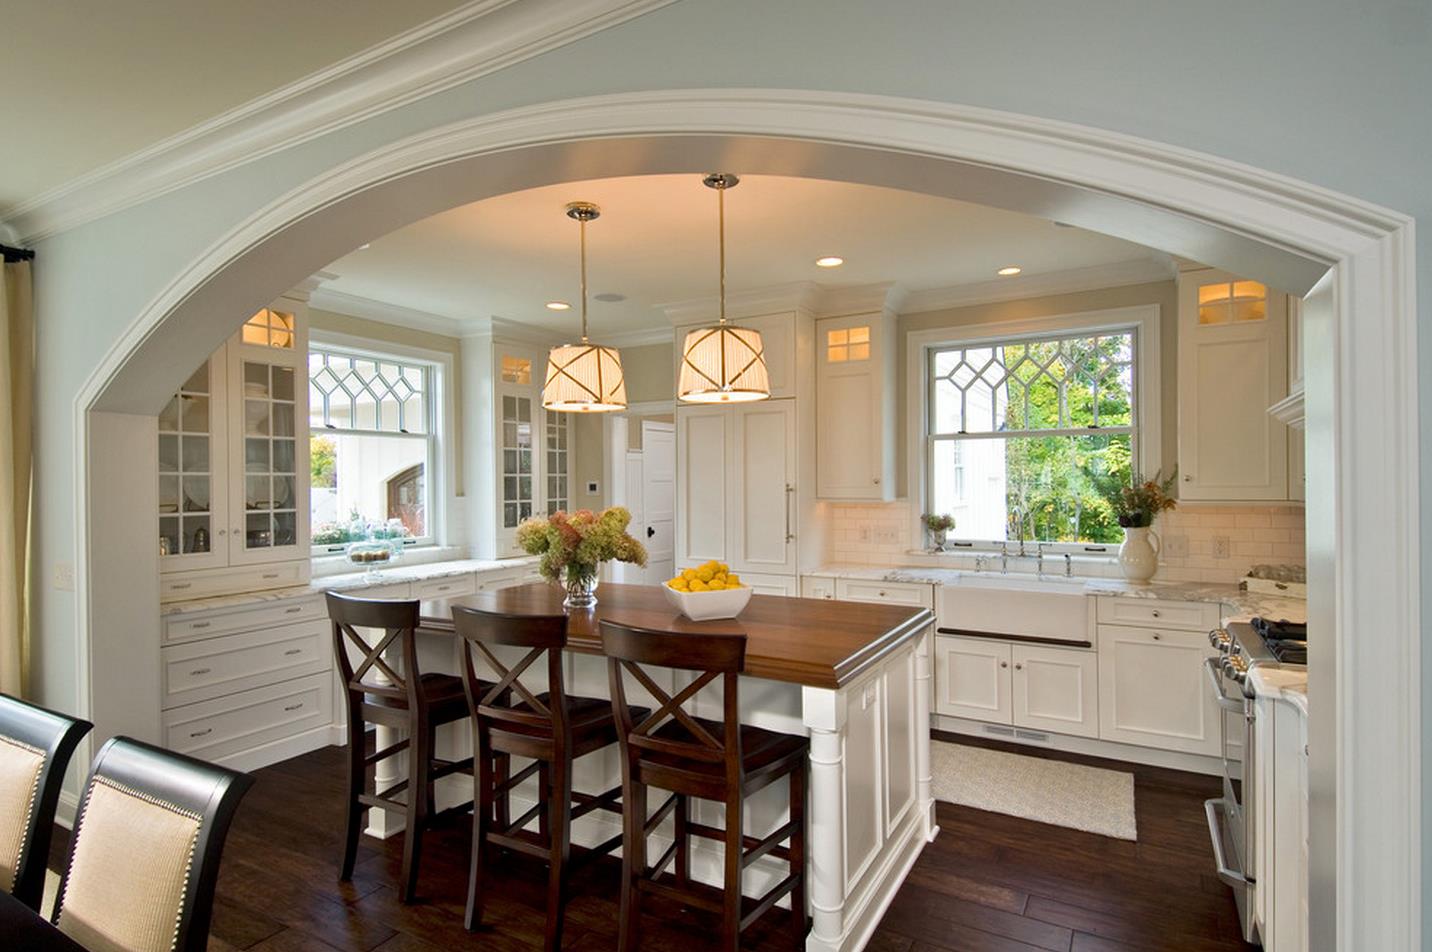 Kitchen Remodeling Mistakes